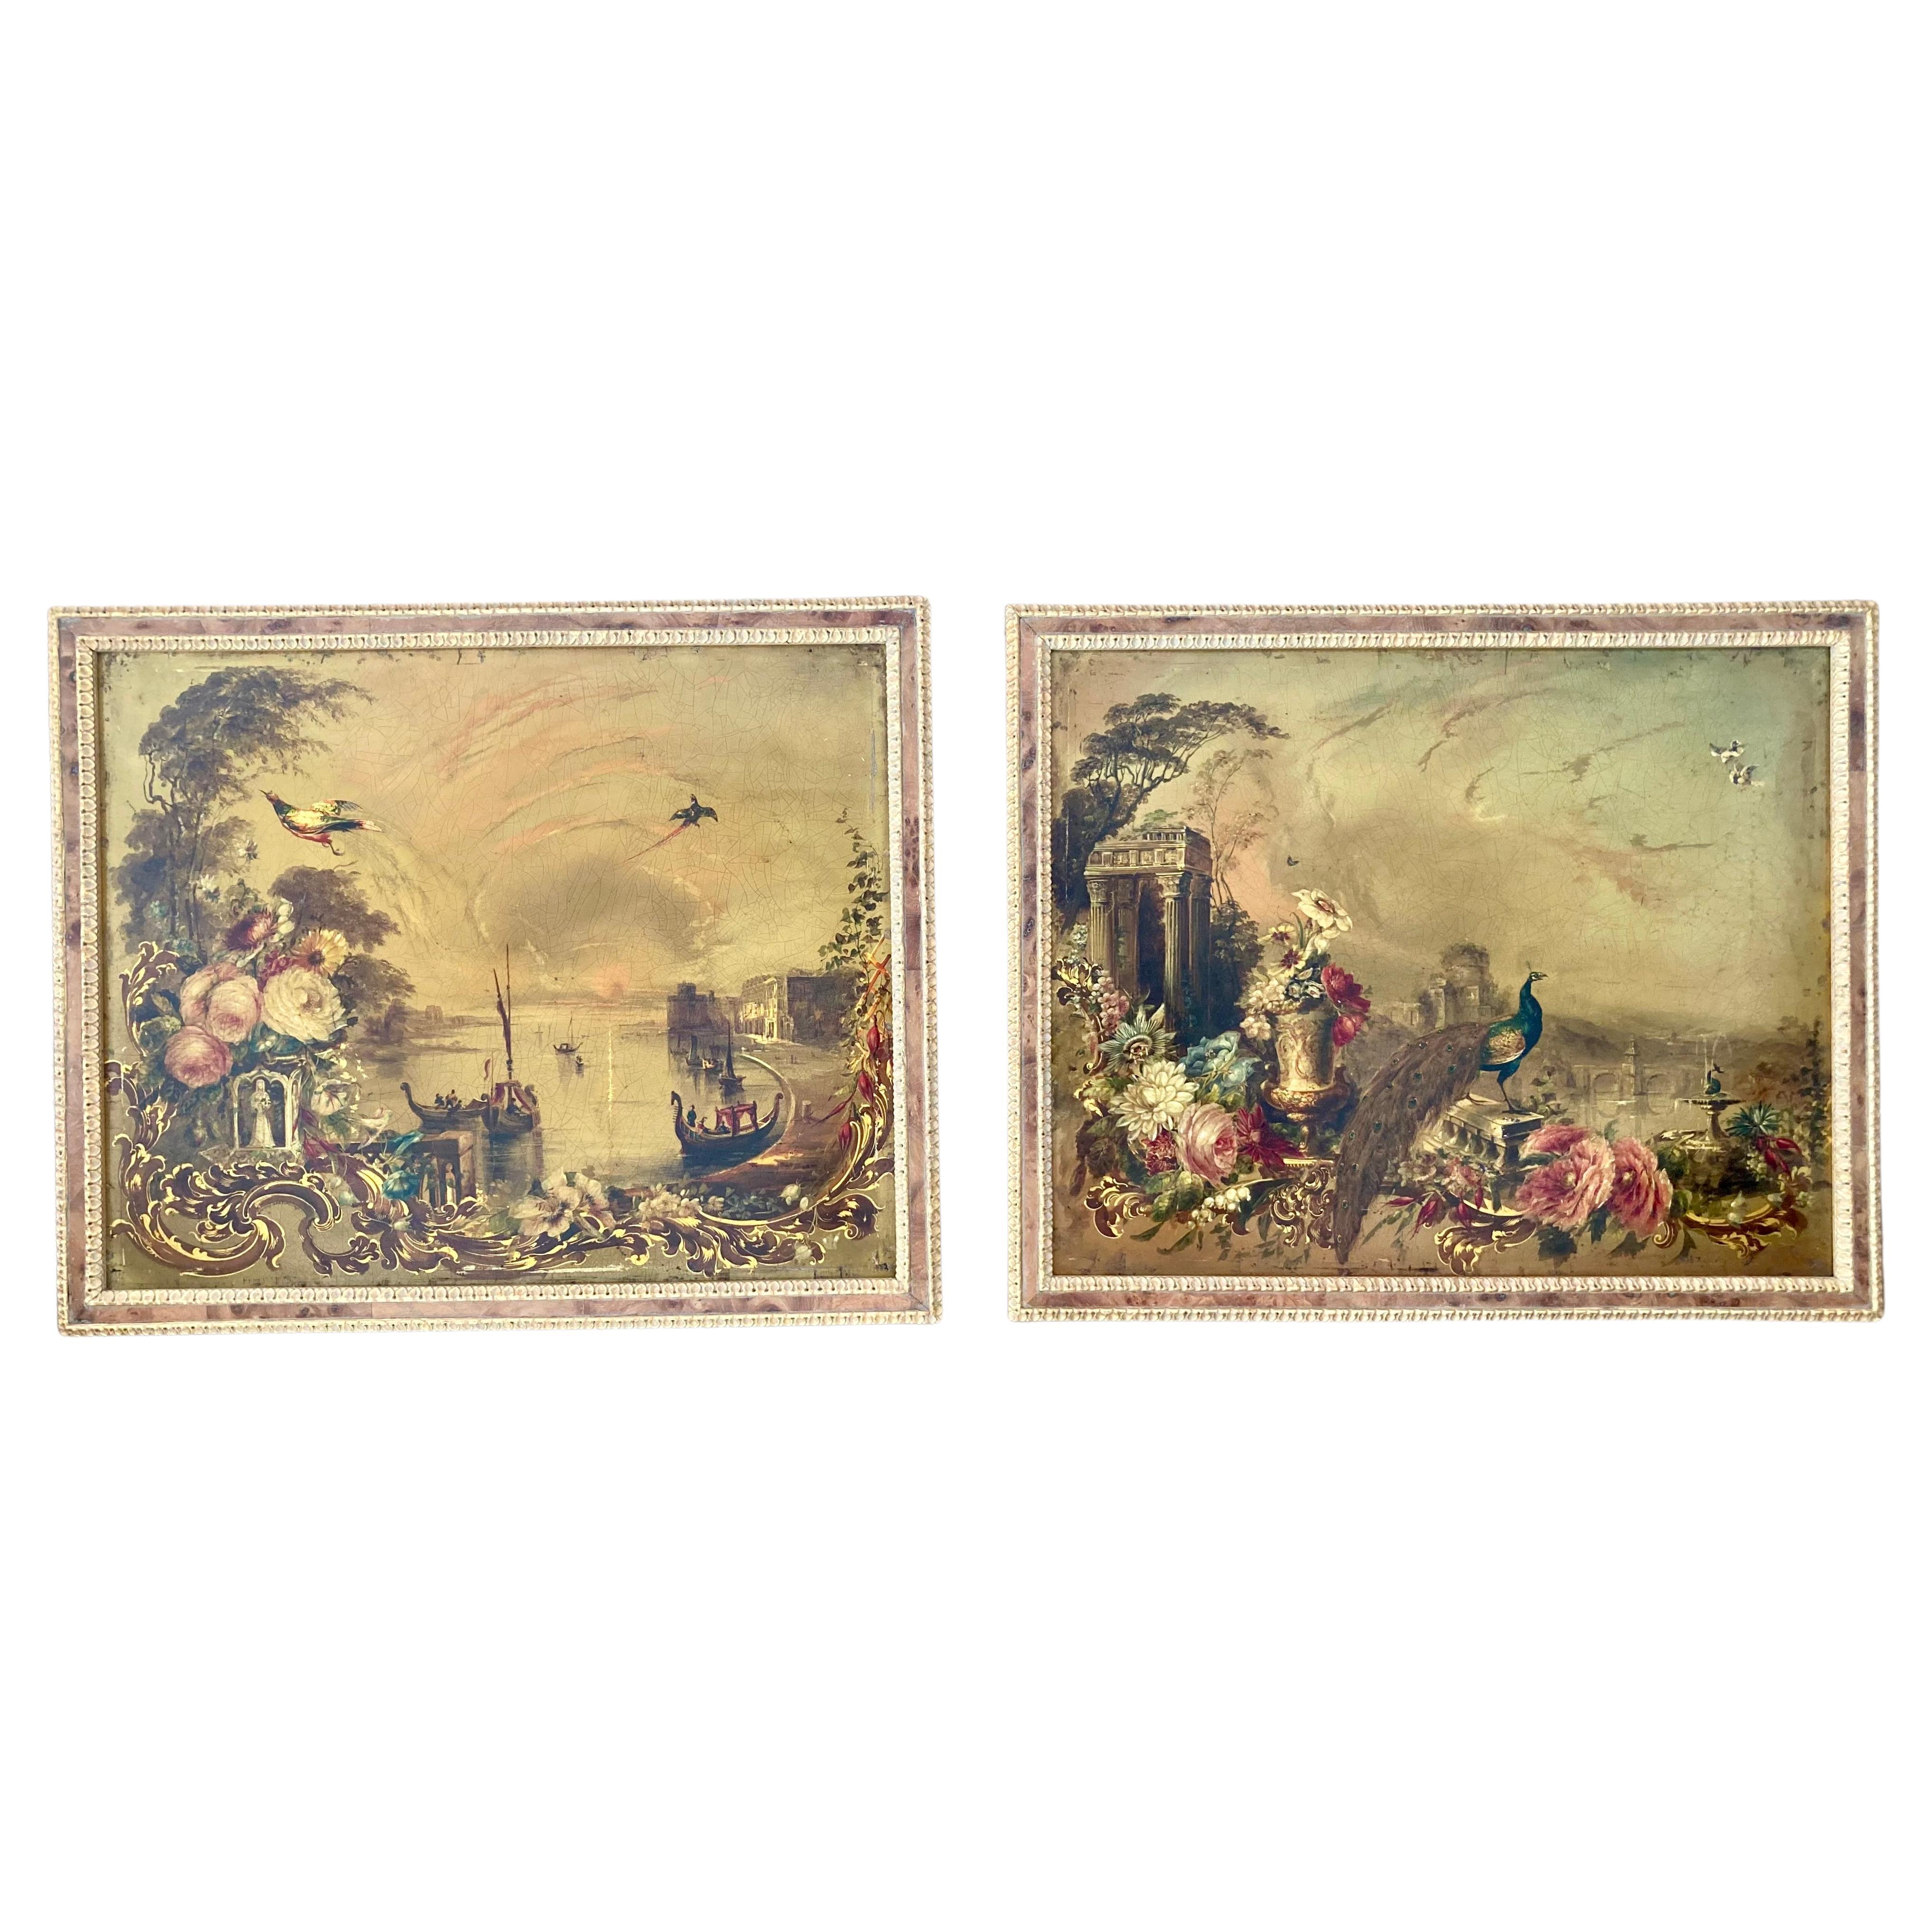 Jennens and Bettridge 19th Century Paintings, a Pair